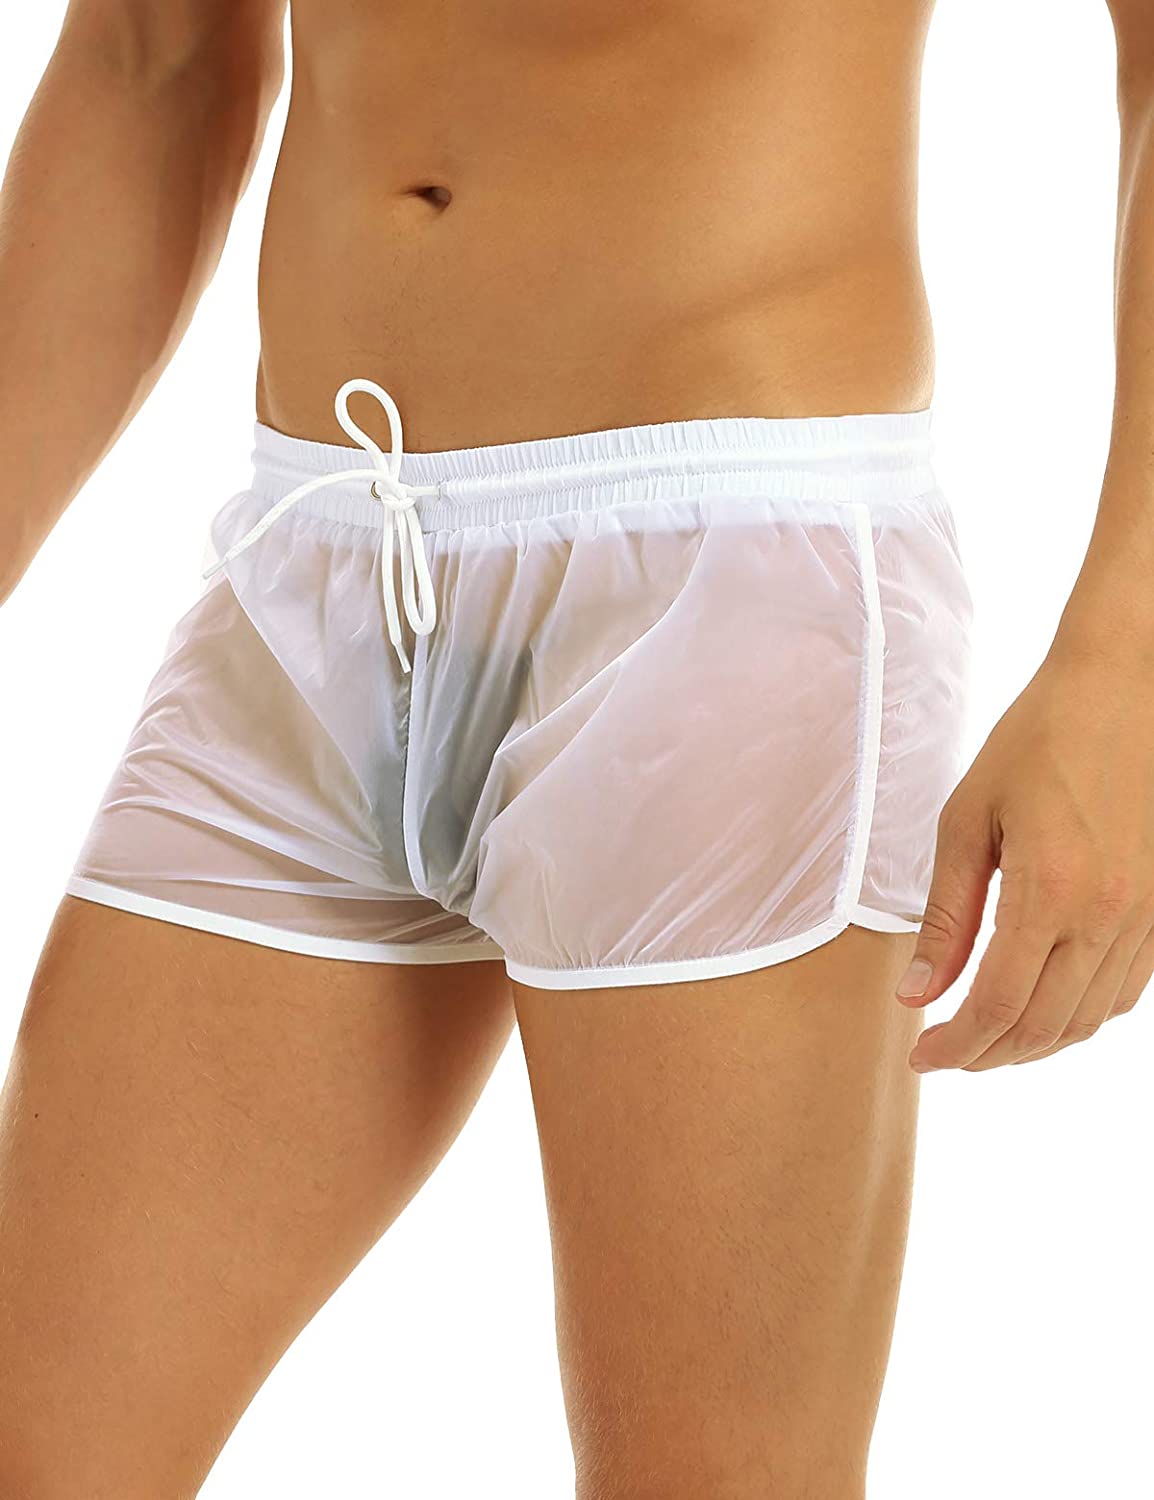 Chictry Mens Translucent Drawstring Boxer Briefs Shorts Breathable